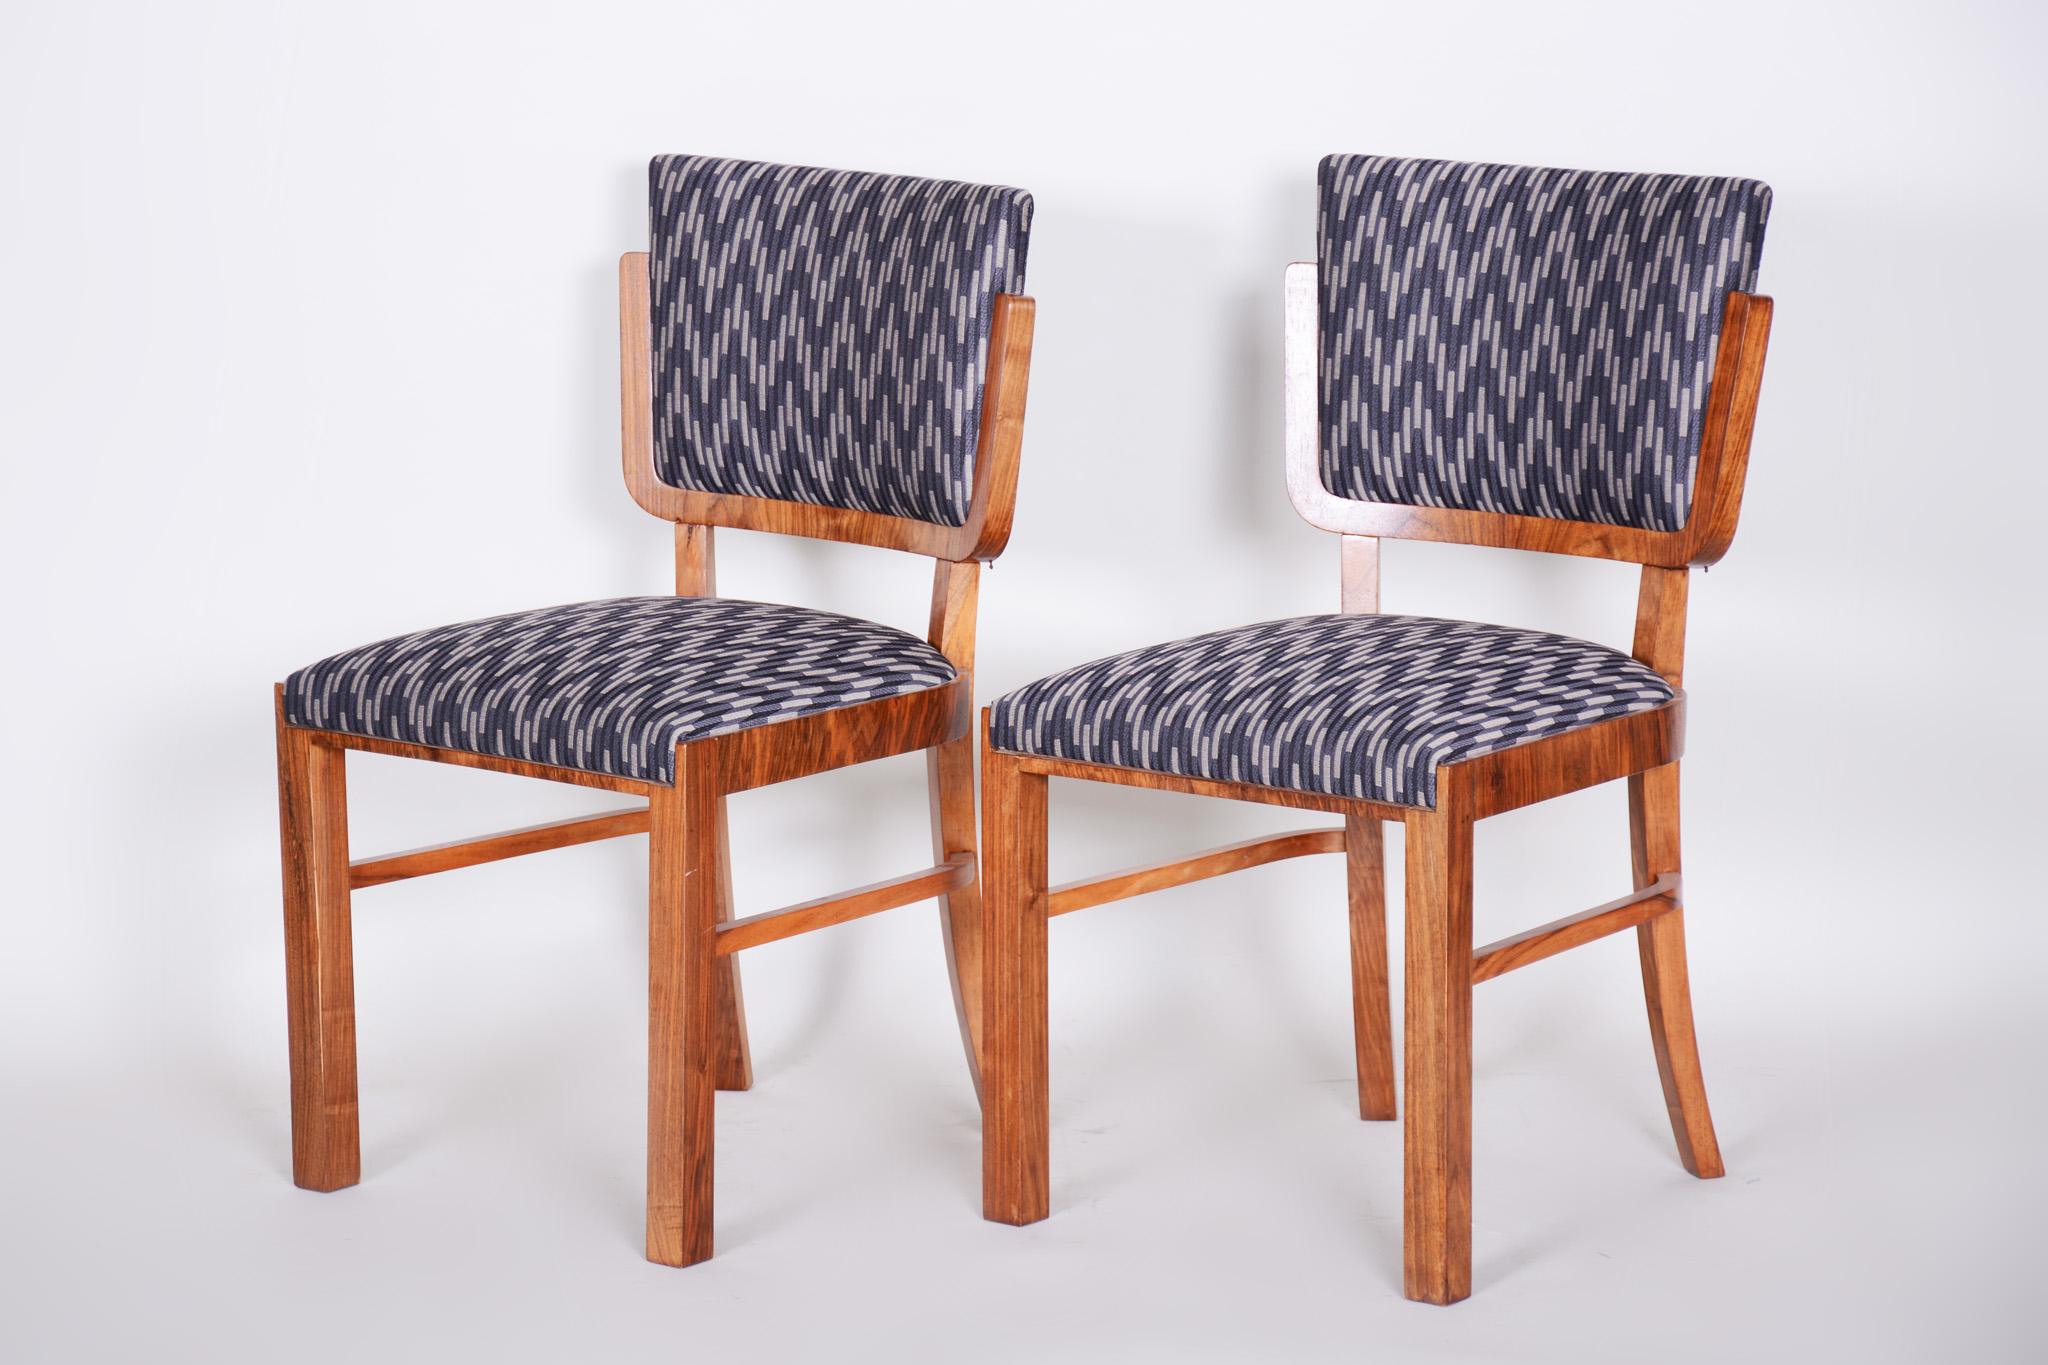 20th Century Set of Restored Art Deco Walnut Chairs, 6 Pieces, France, New Upholstery, 1930s